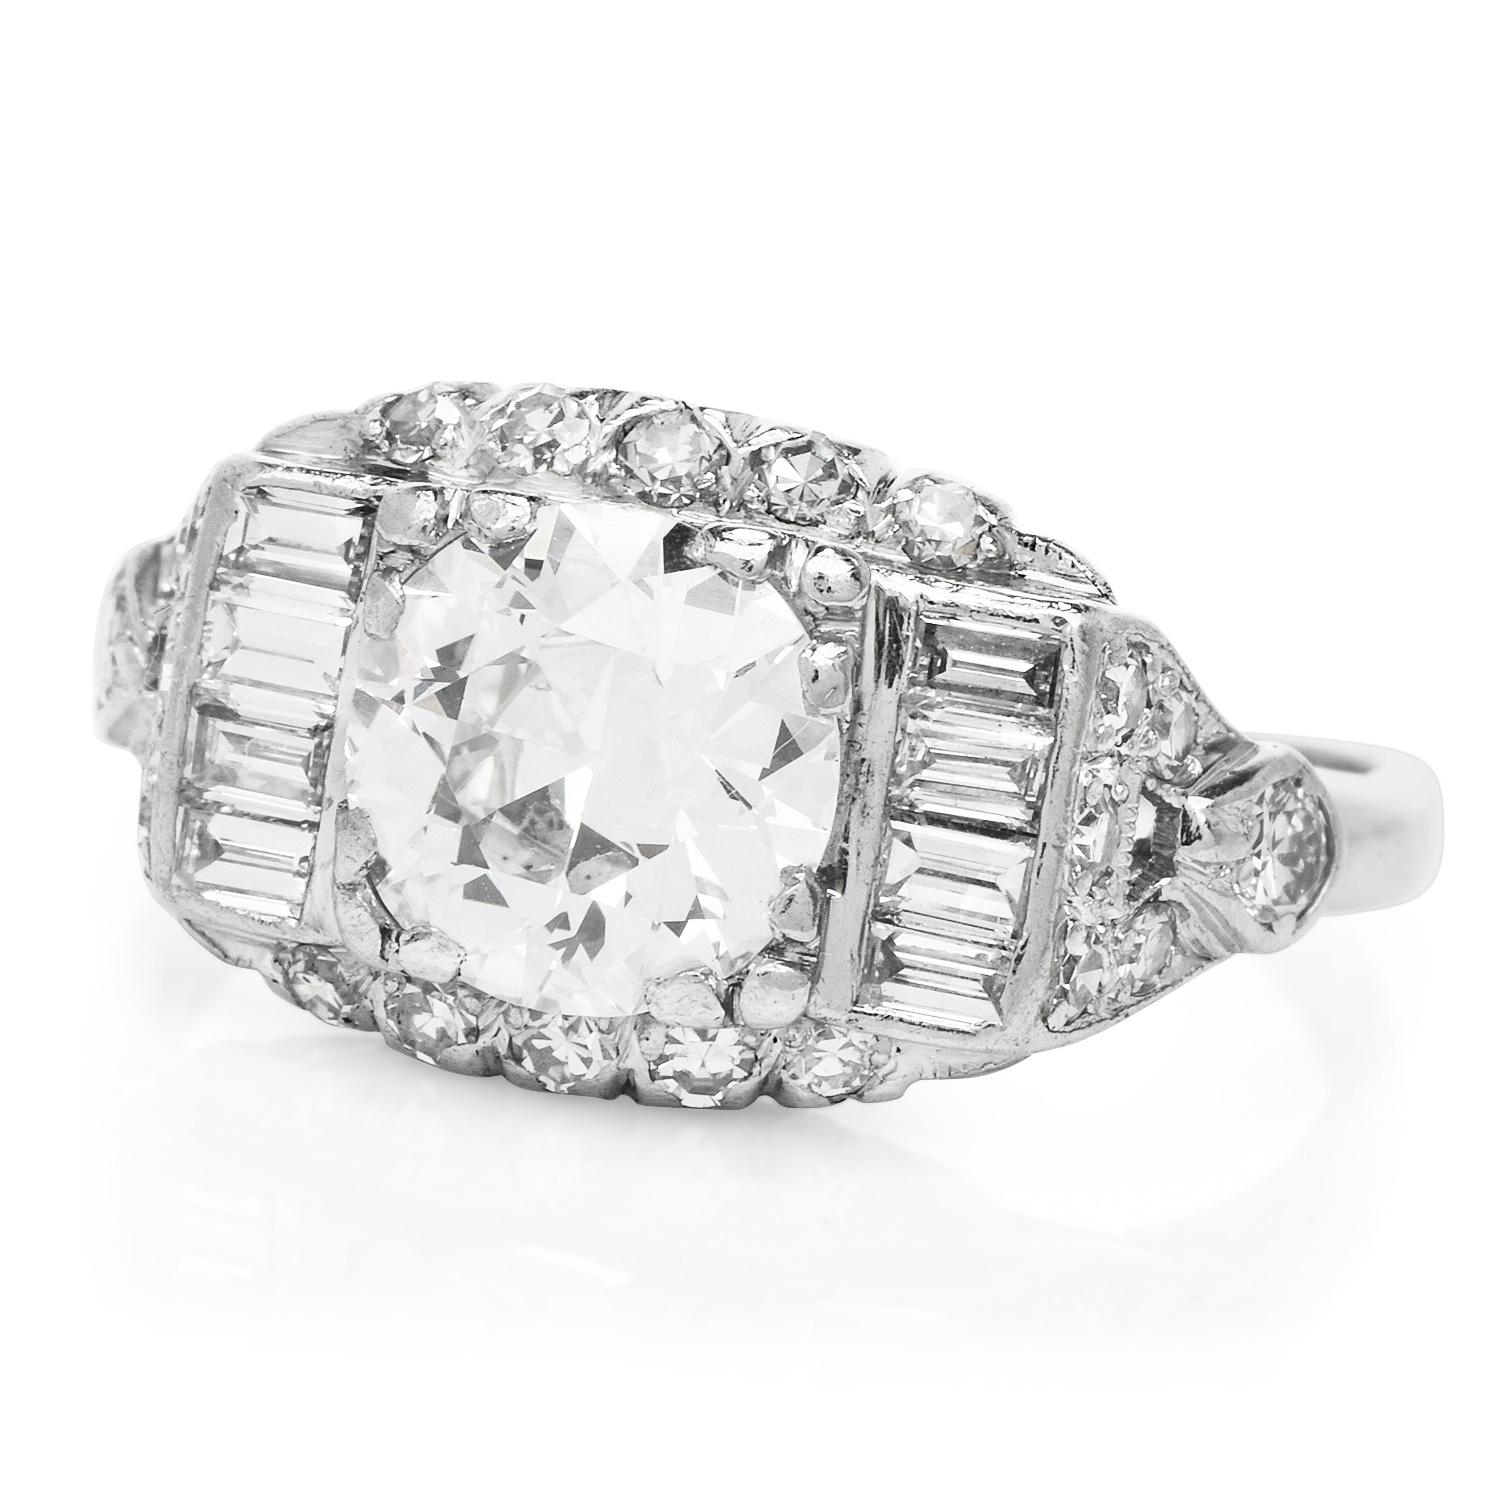 
Antique Engagement Ring represents a lifetime of love and treasures.

This Antique diamond ring is Crafted in Platinum, accented with an Old European cut Center diamond, round, Prong-set, 1.25 carats, G-H color & VS1 clarity.

Complimenting the